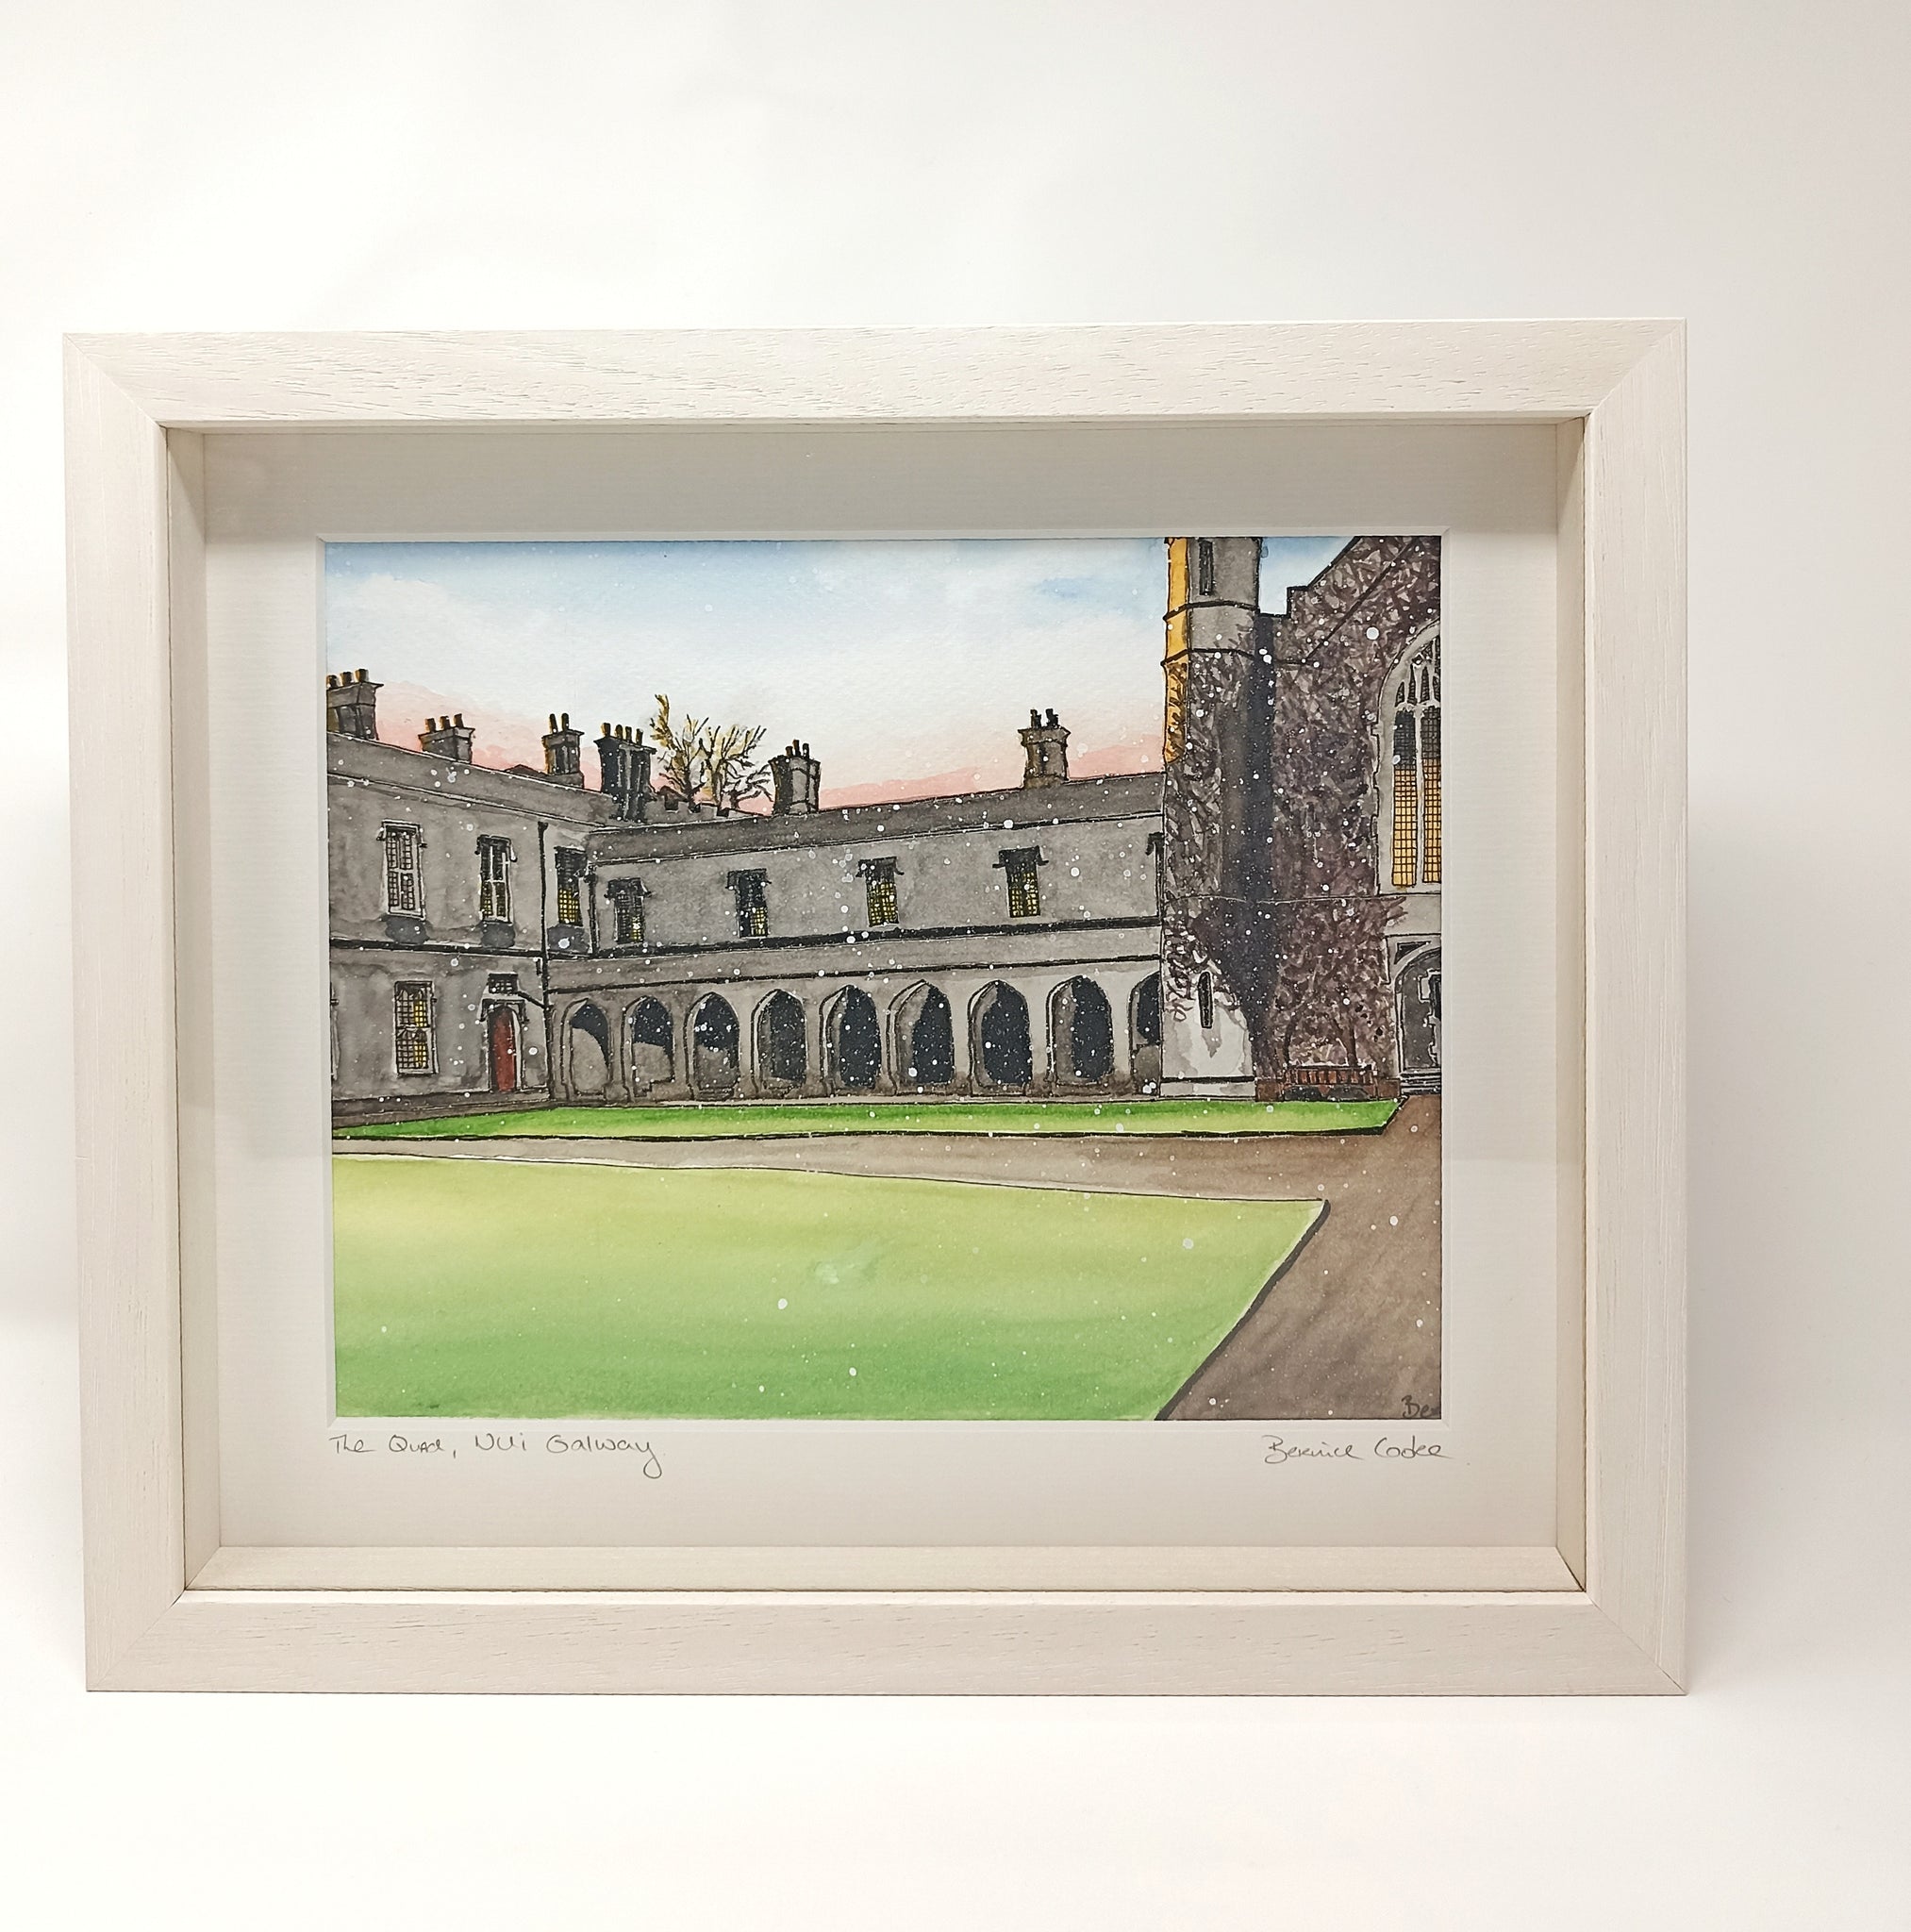 The Quad NUI Galway - Original Painting - Pen and Watercolor